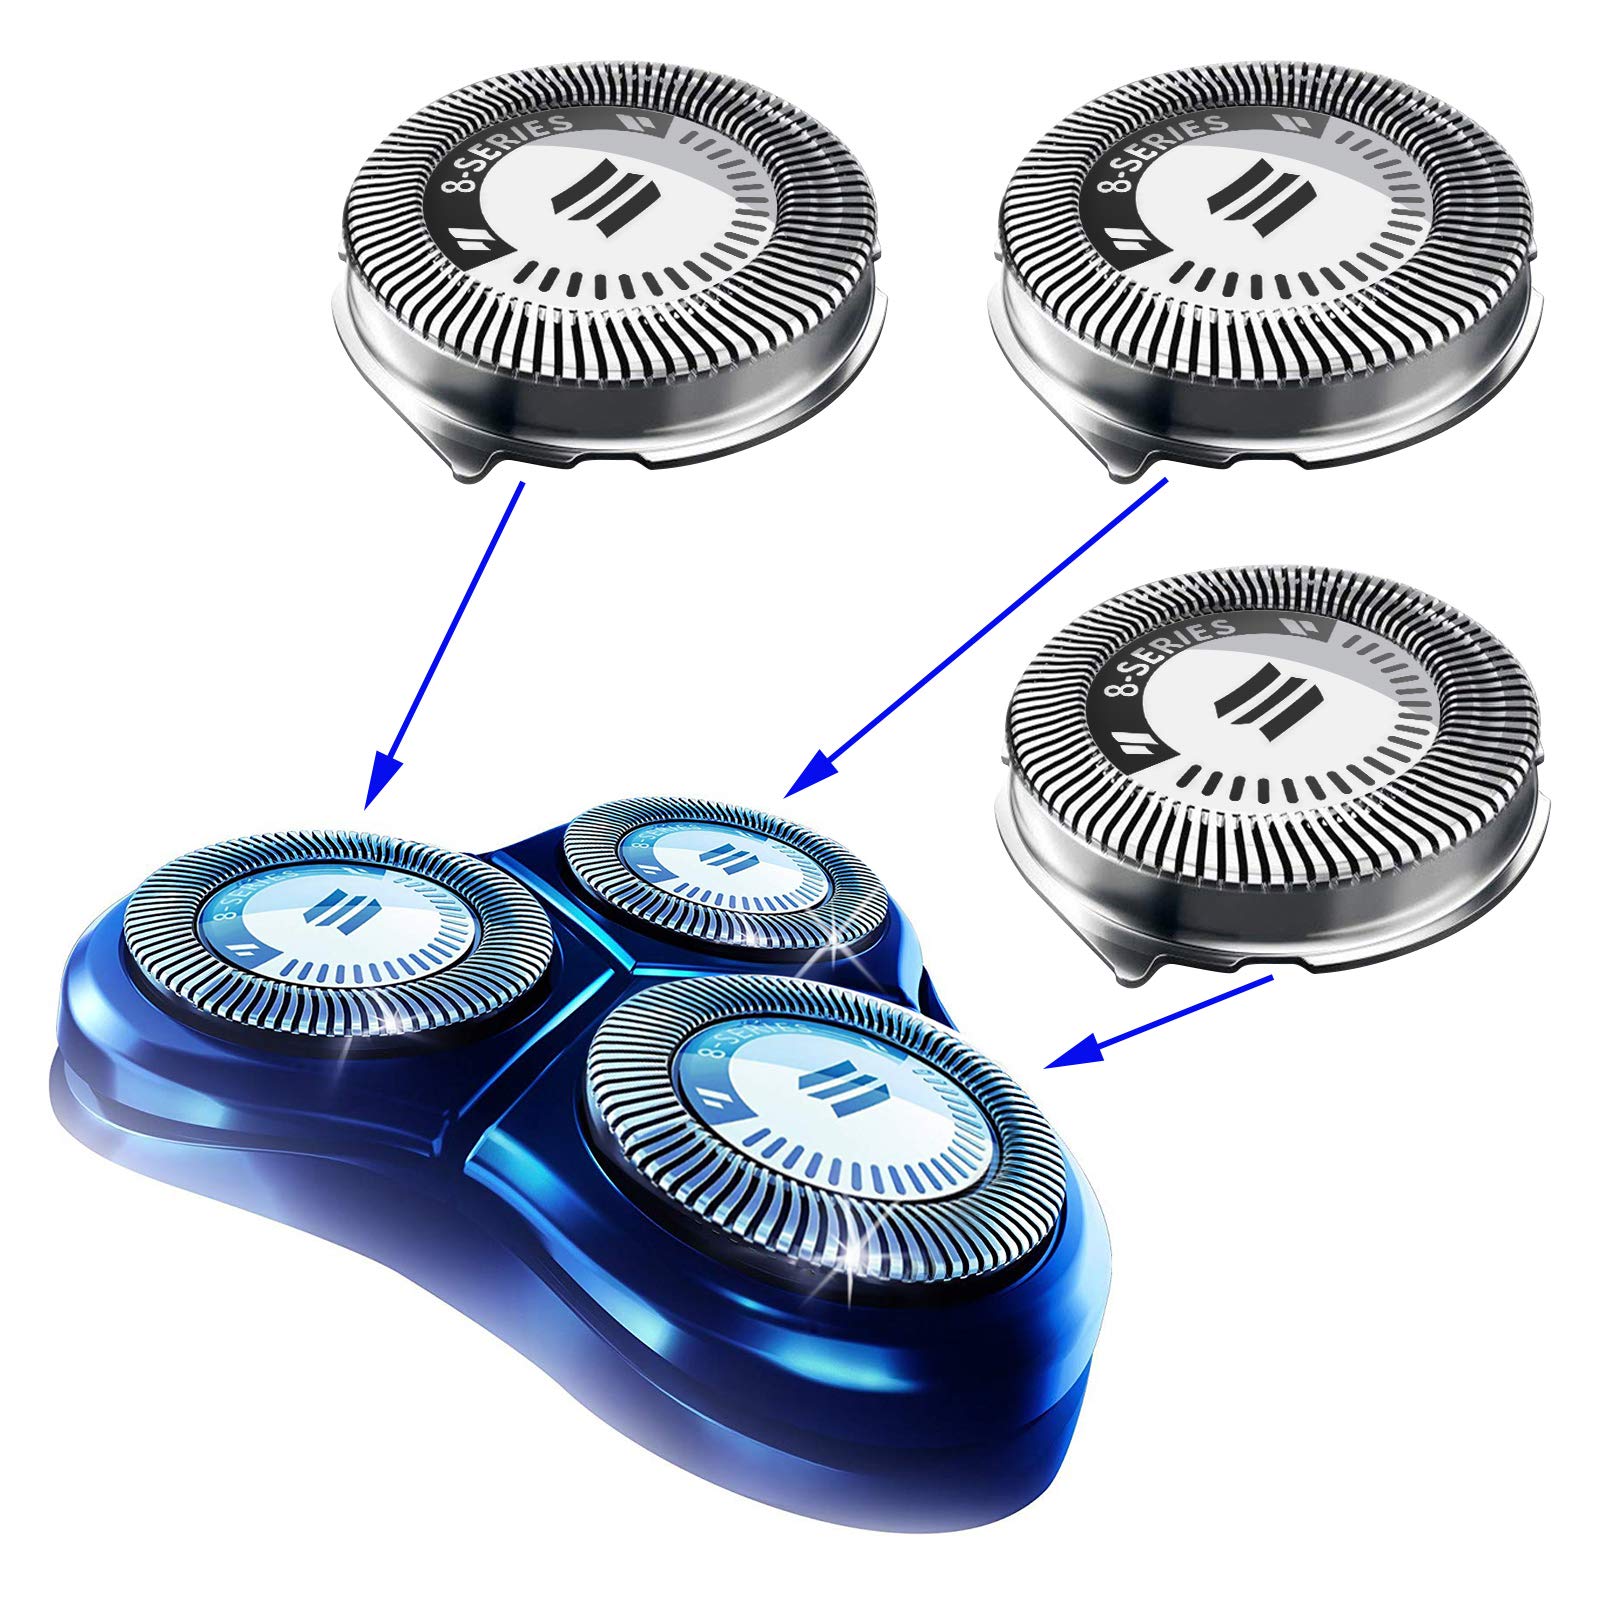 Termation HQ8 Replacement Heads for Philips Norelco Shavers, OEM HQ8 Heads New Upgraded